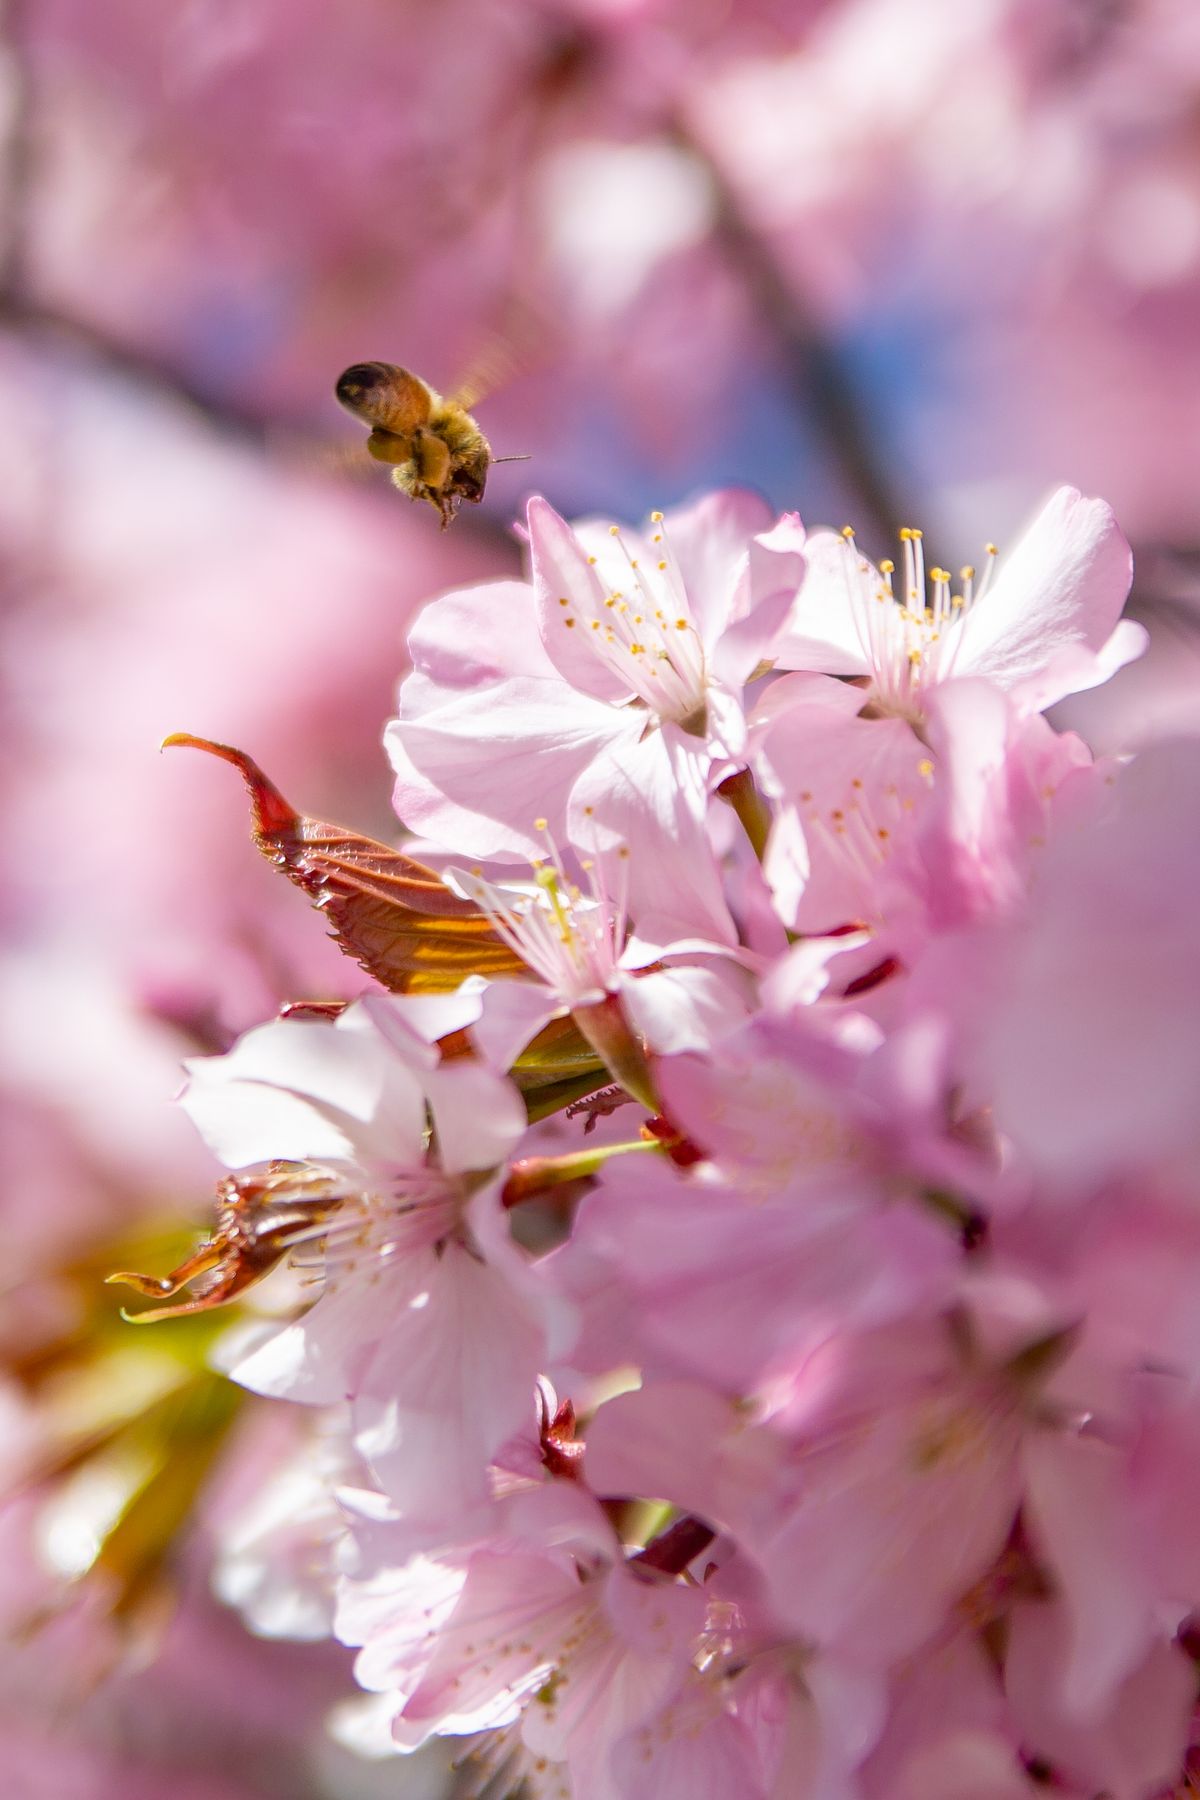 An incoming honeybee sets its sights on a cherry blossom that needs pollinating April 15 in Spokane. When standing next to the trunk and listening closely under the tree, one could audibly hear the hum from the busy bees working through the bloom.  (Libby Kamrowski/The Spokesman-Review)